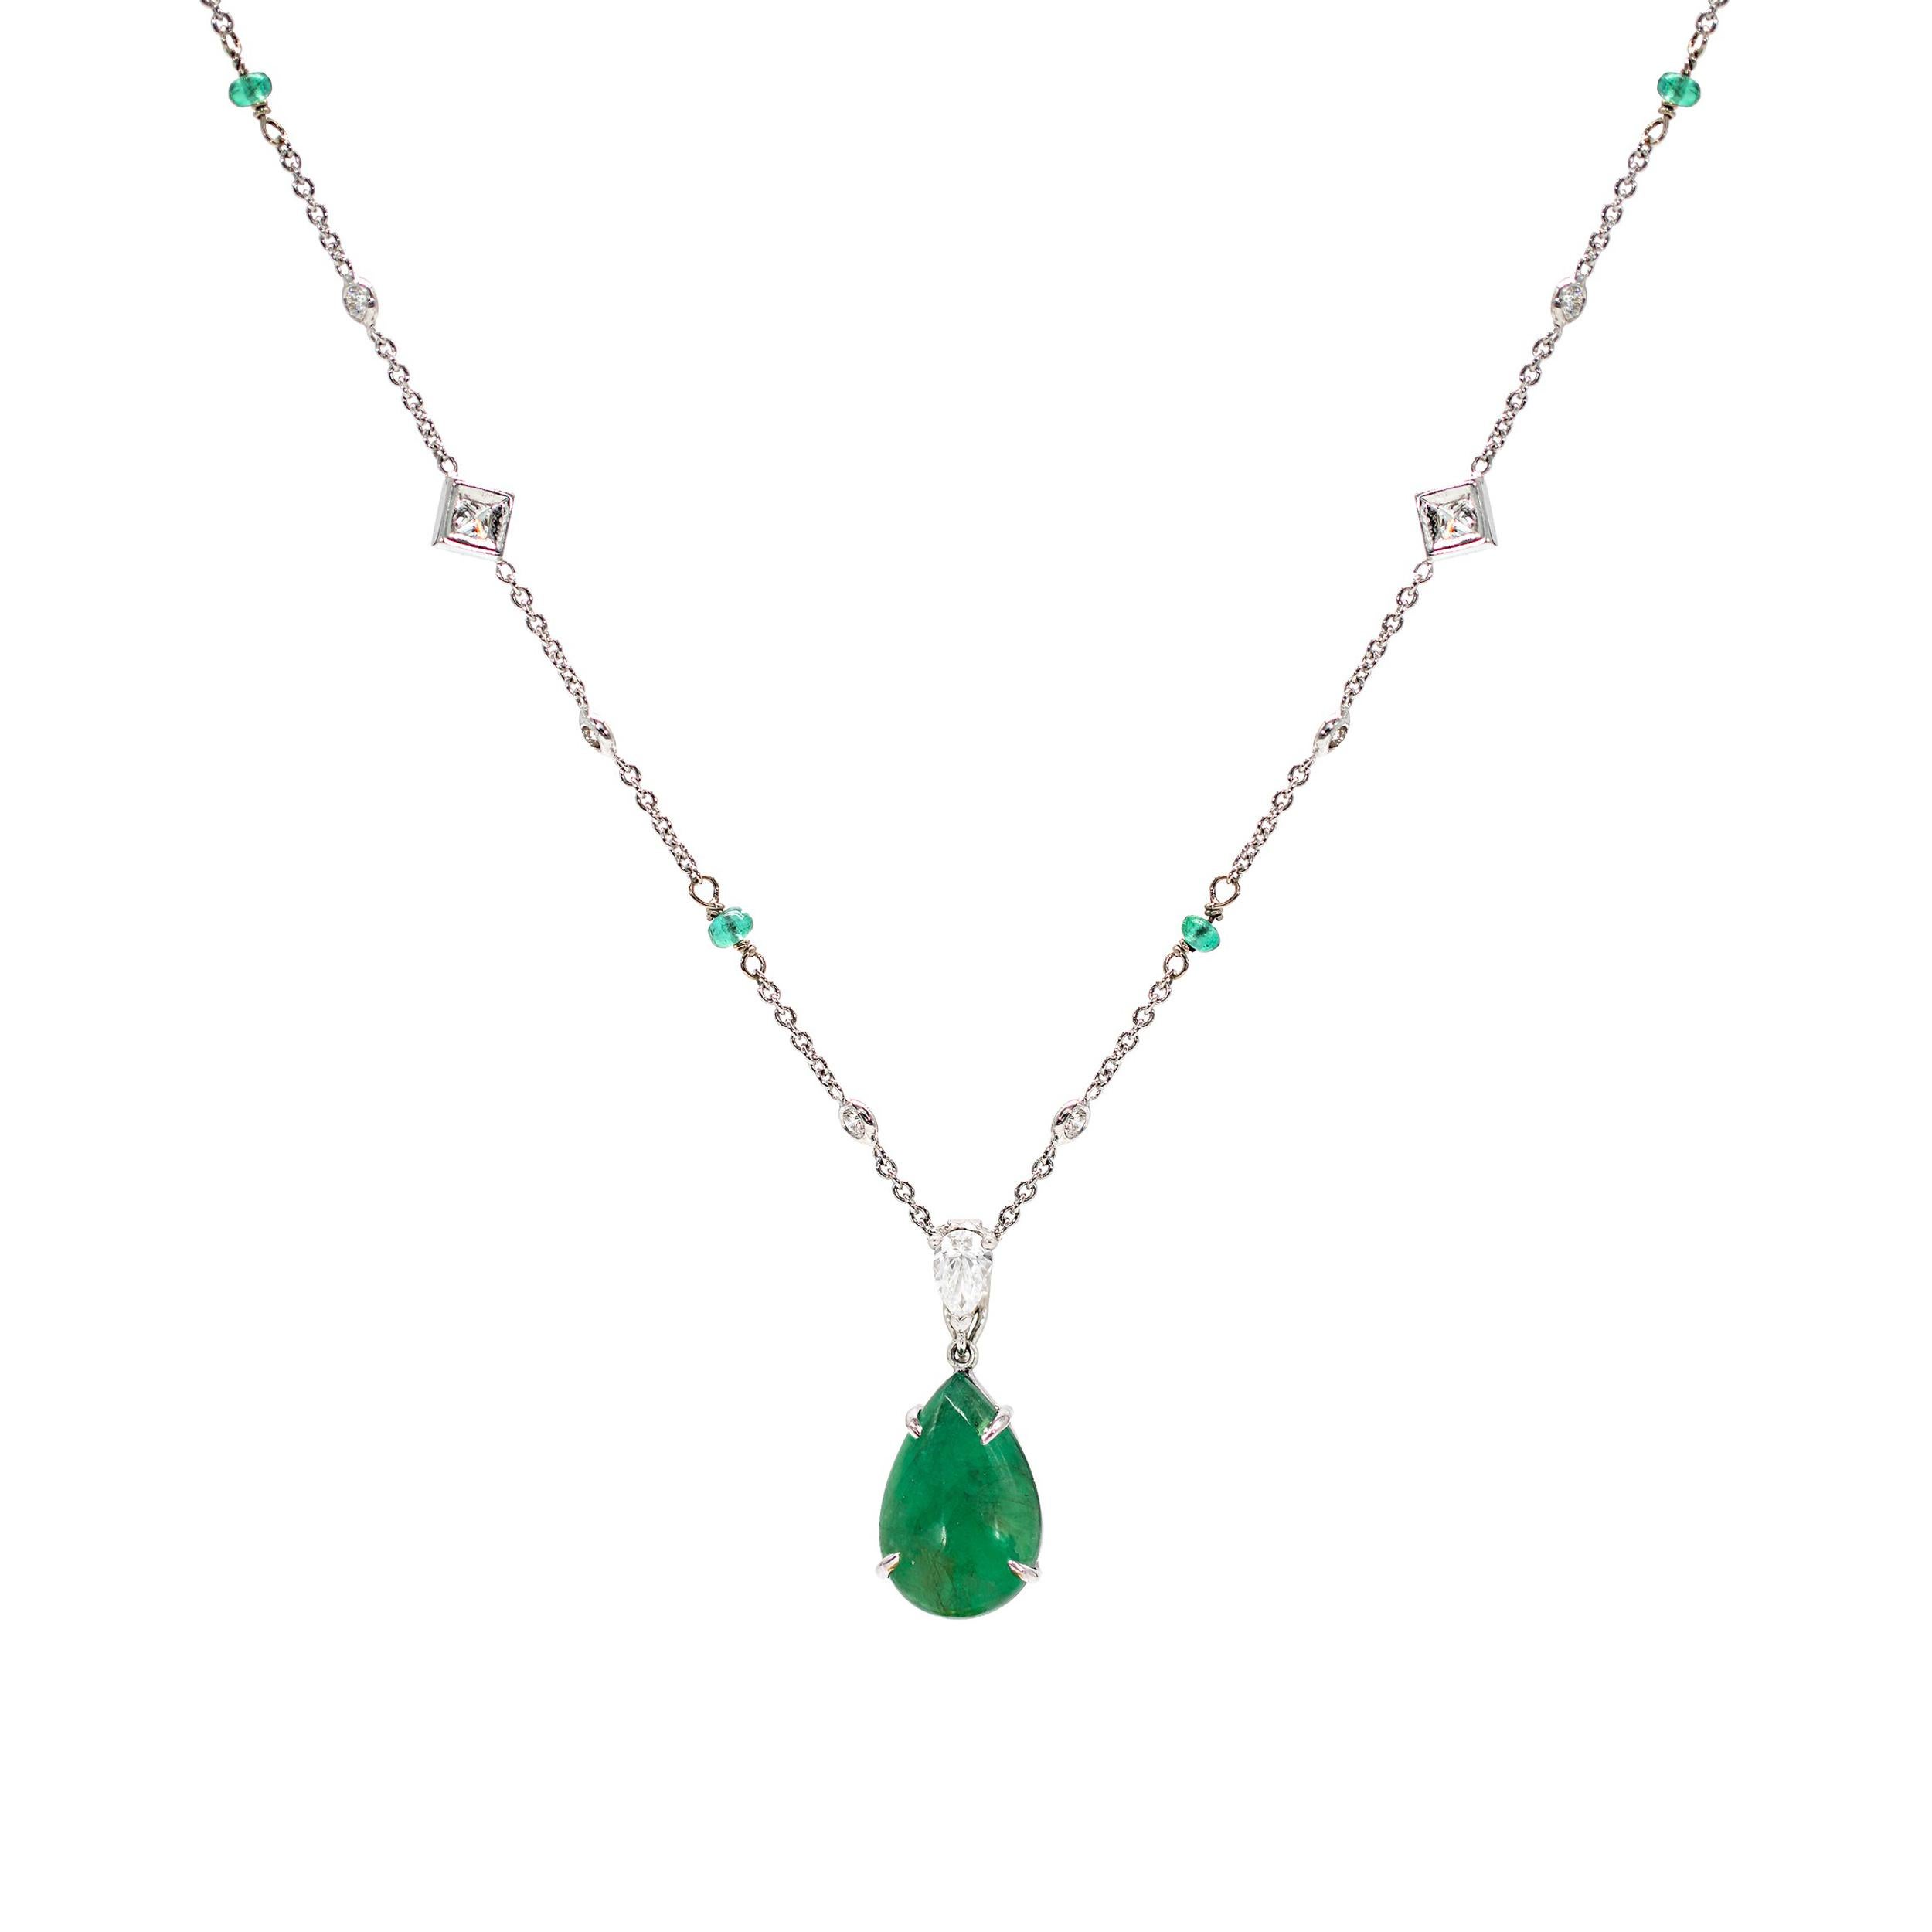 5.77 Carat Emerald and Diamond Necklace in Platinum with Diamonds by Yard Chain